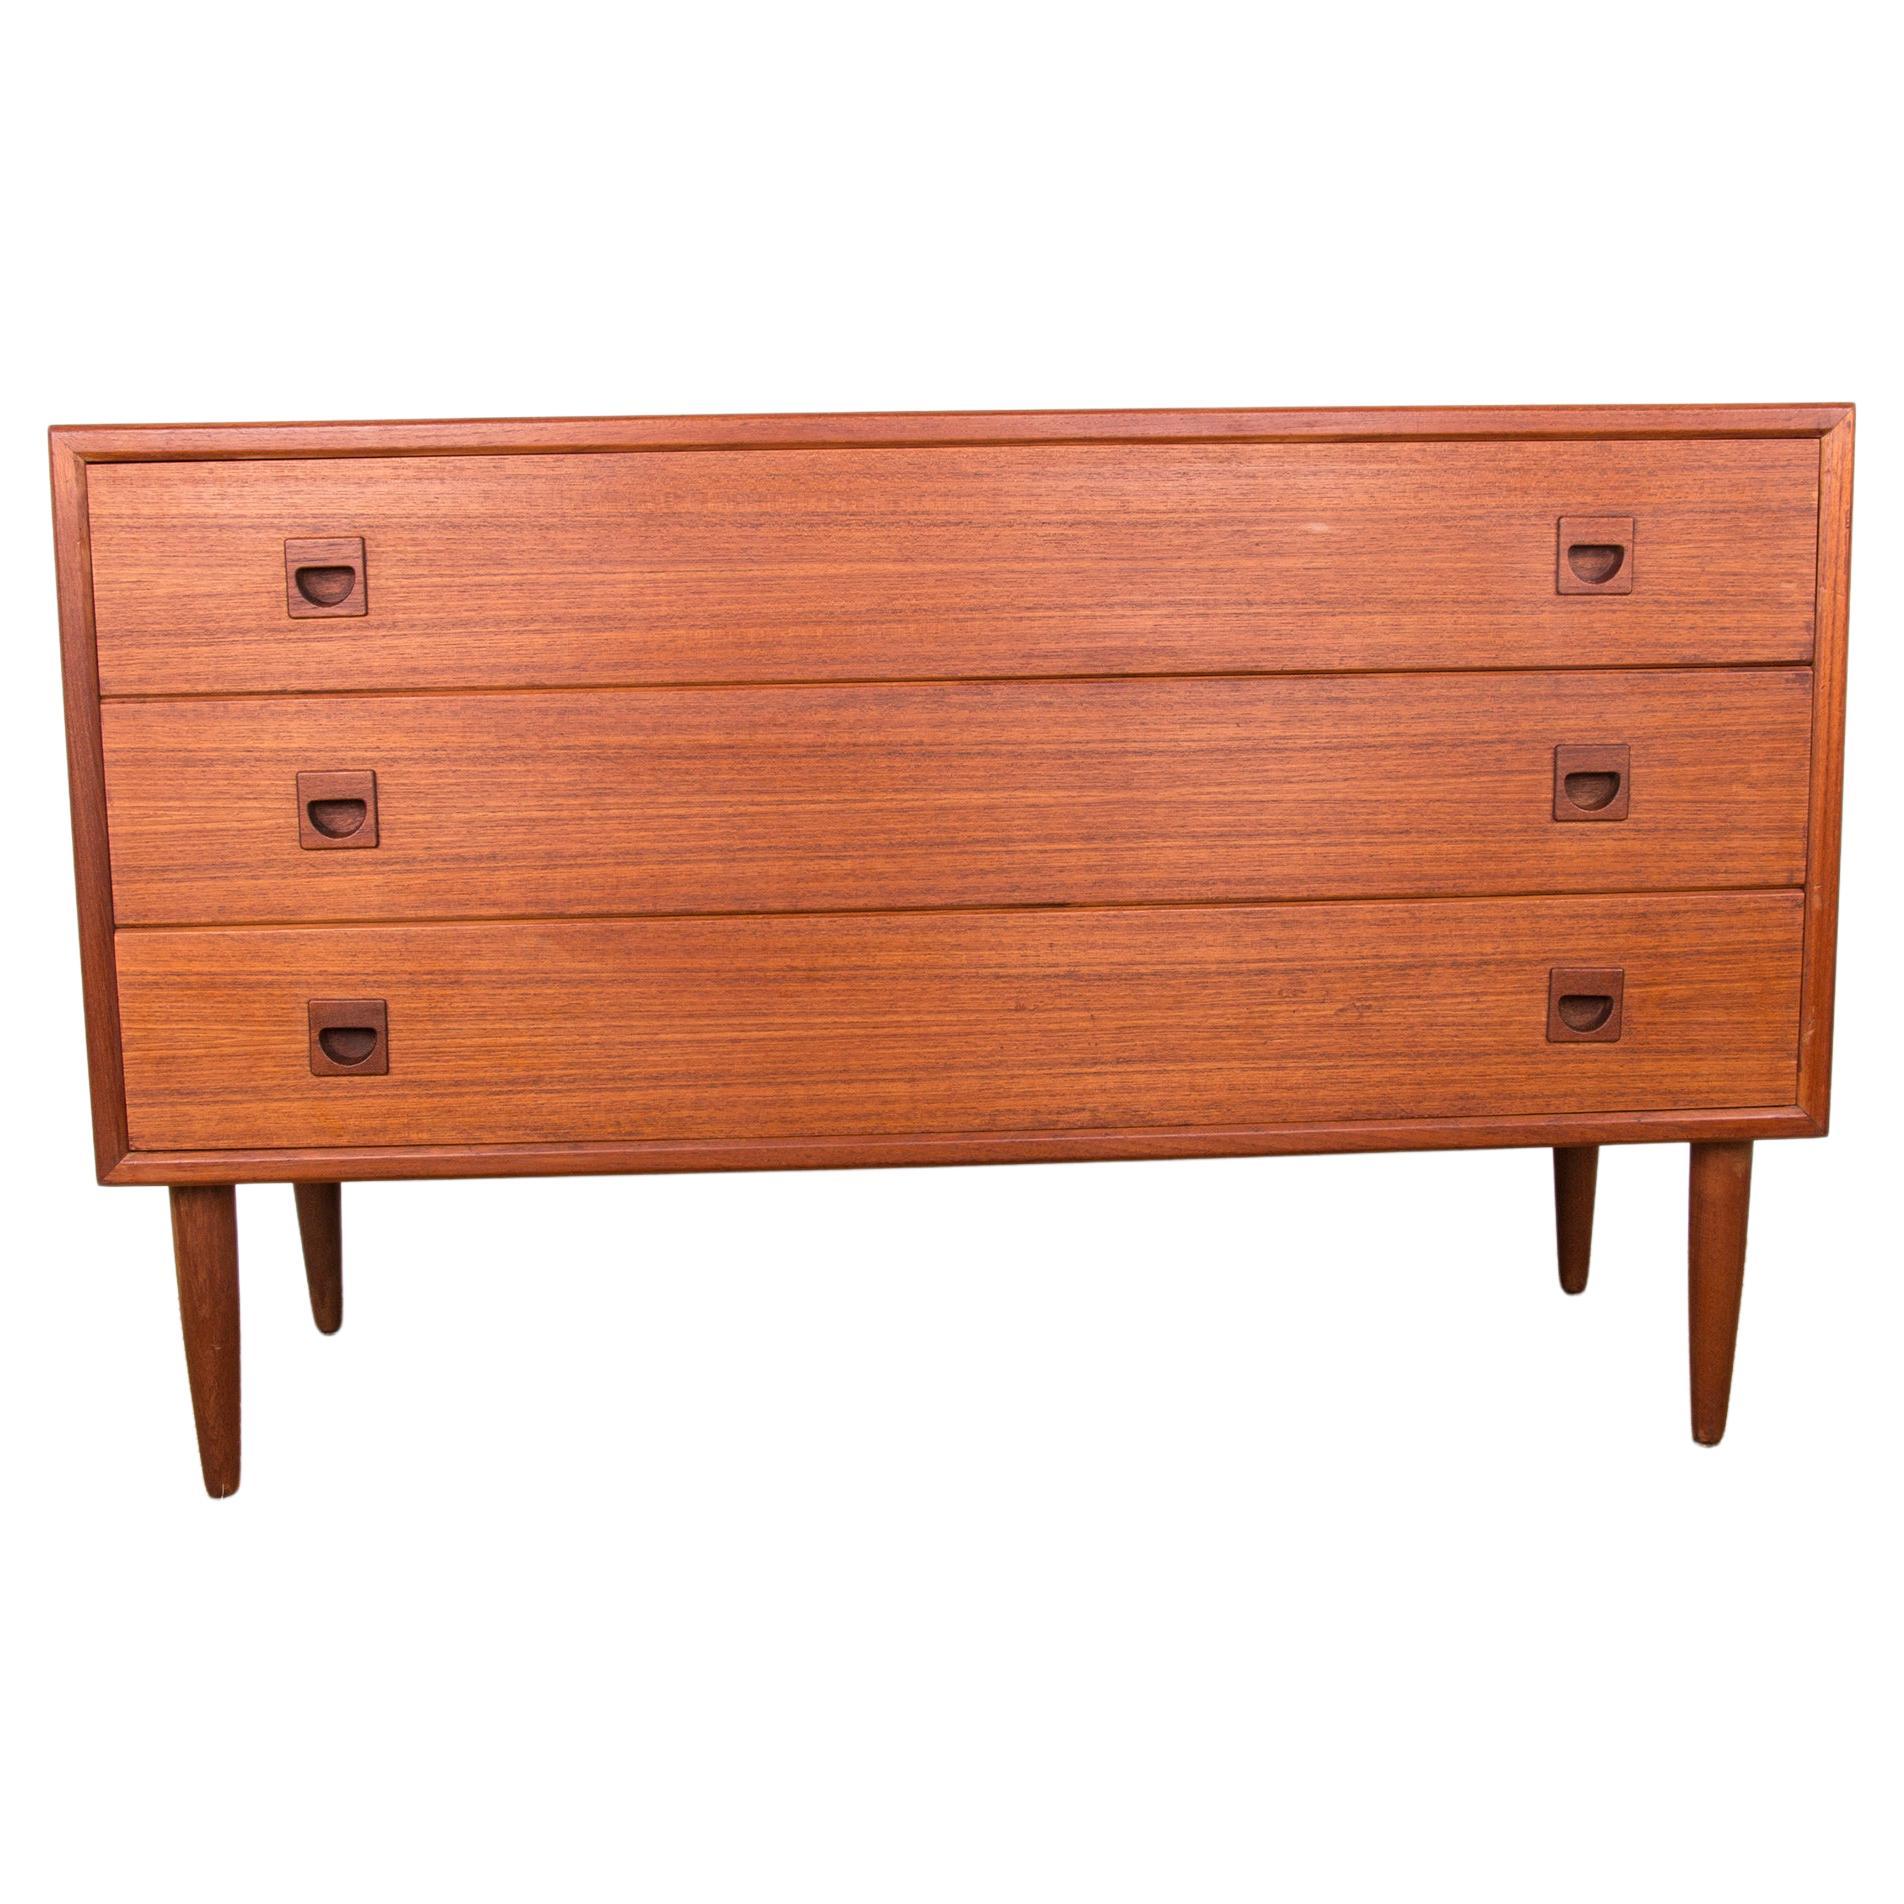 Danish teak chest of drawers or small sideboard, 3 large drawers, 1960.